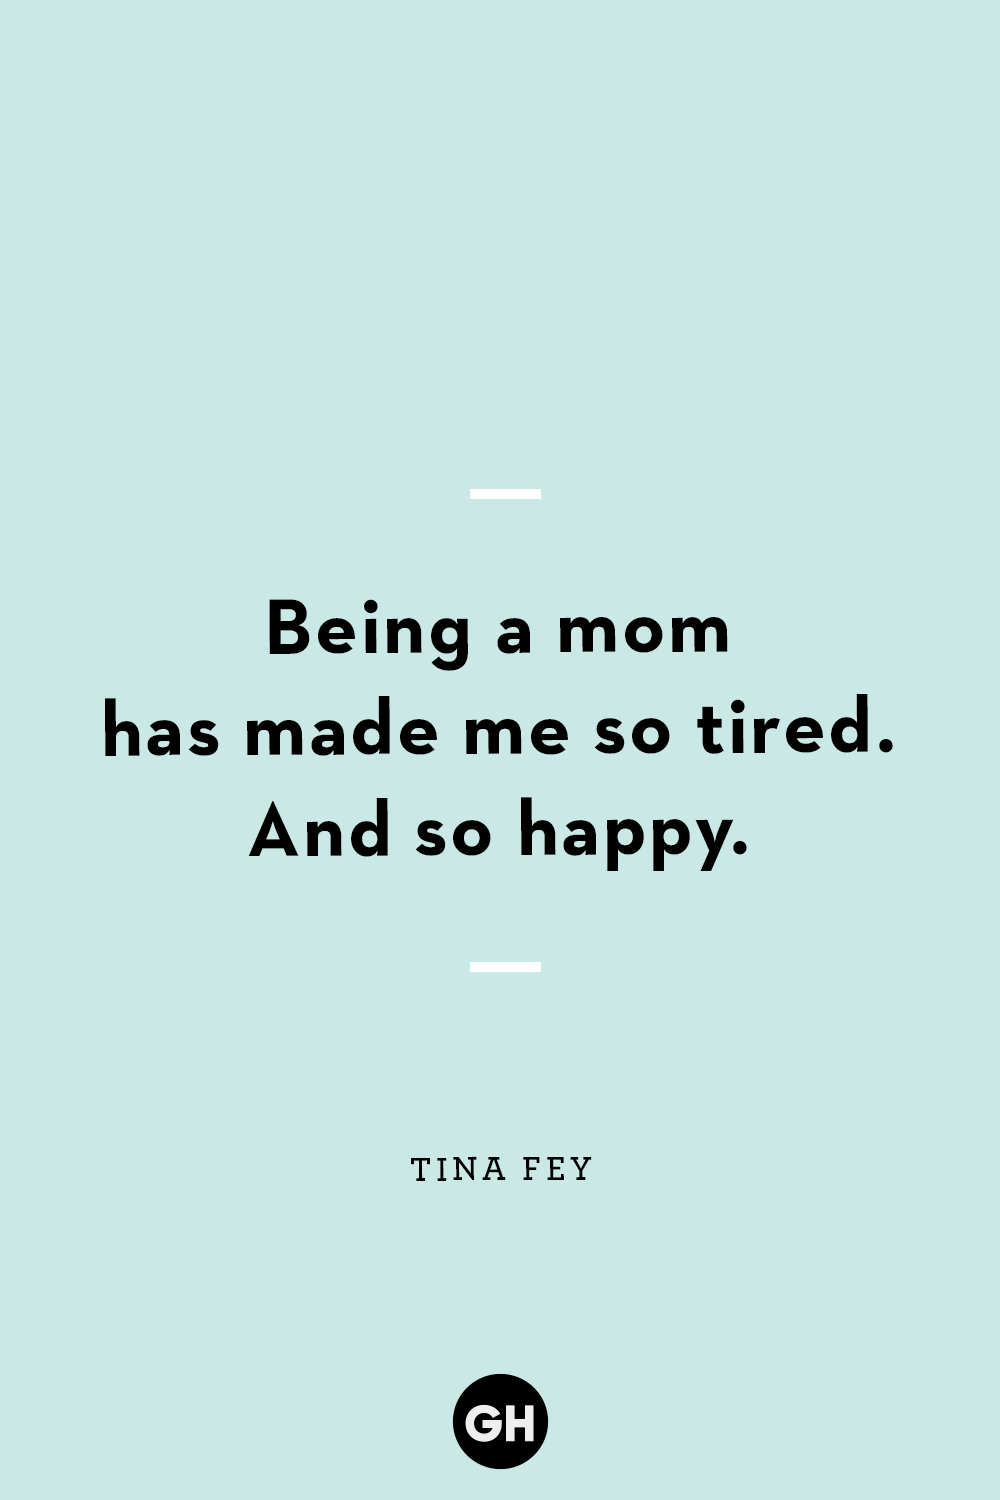 40 Best New-Mom Quotes - Wise Sayings for First-Time Parents